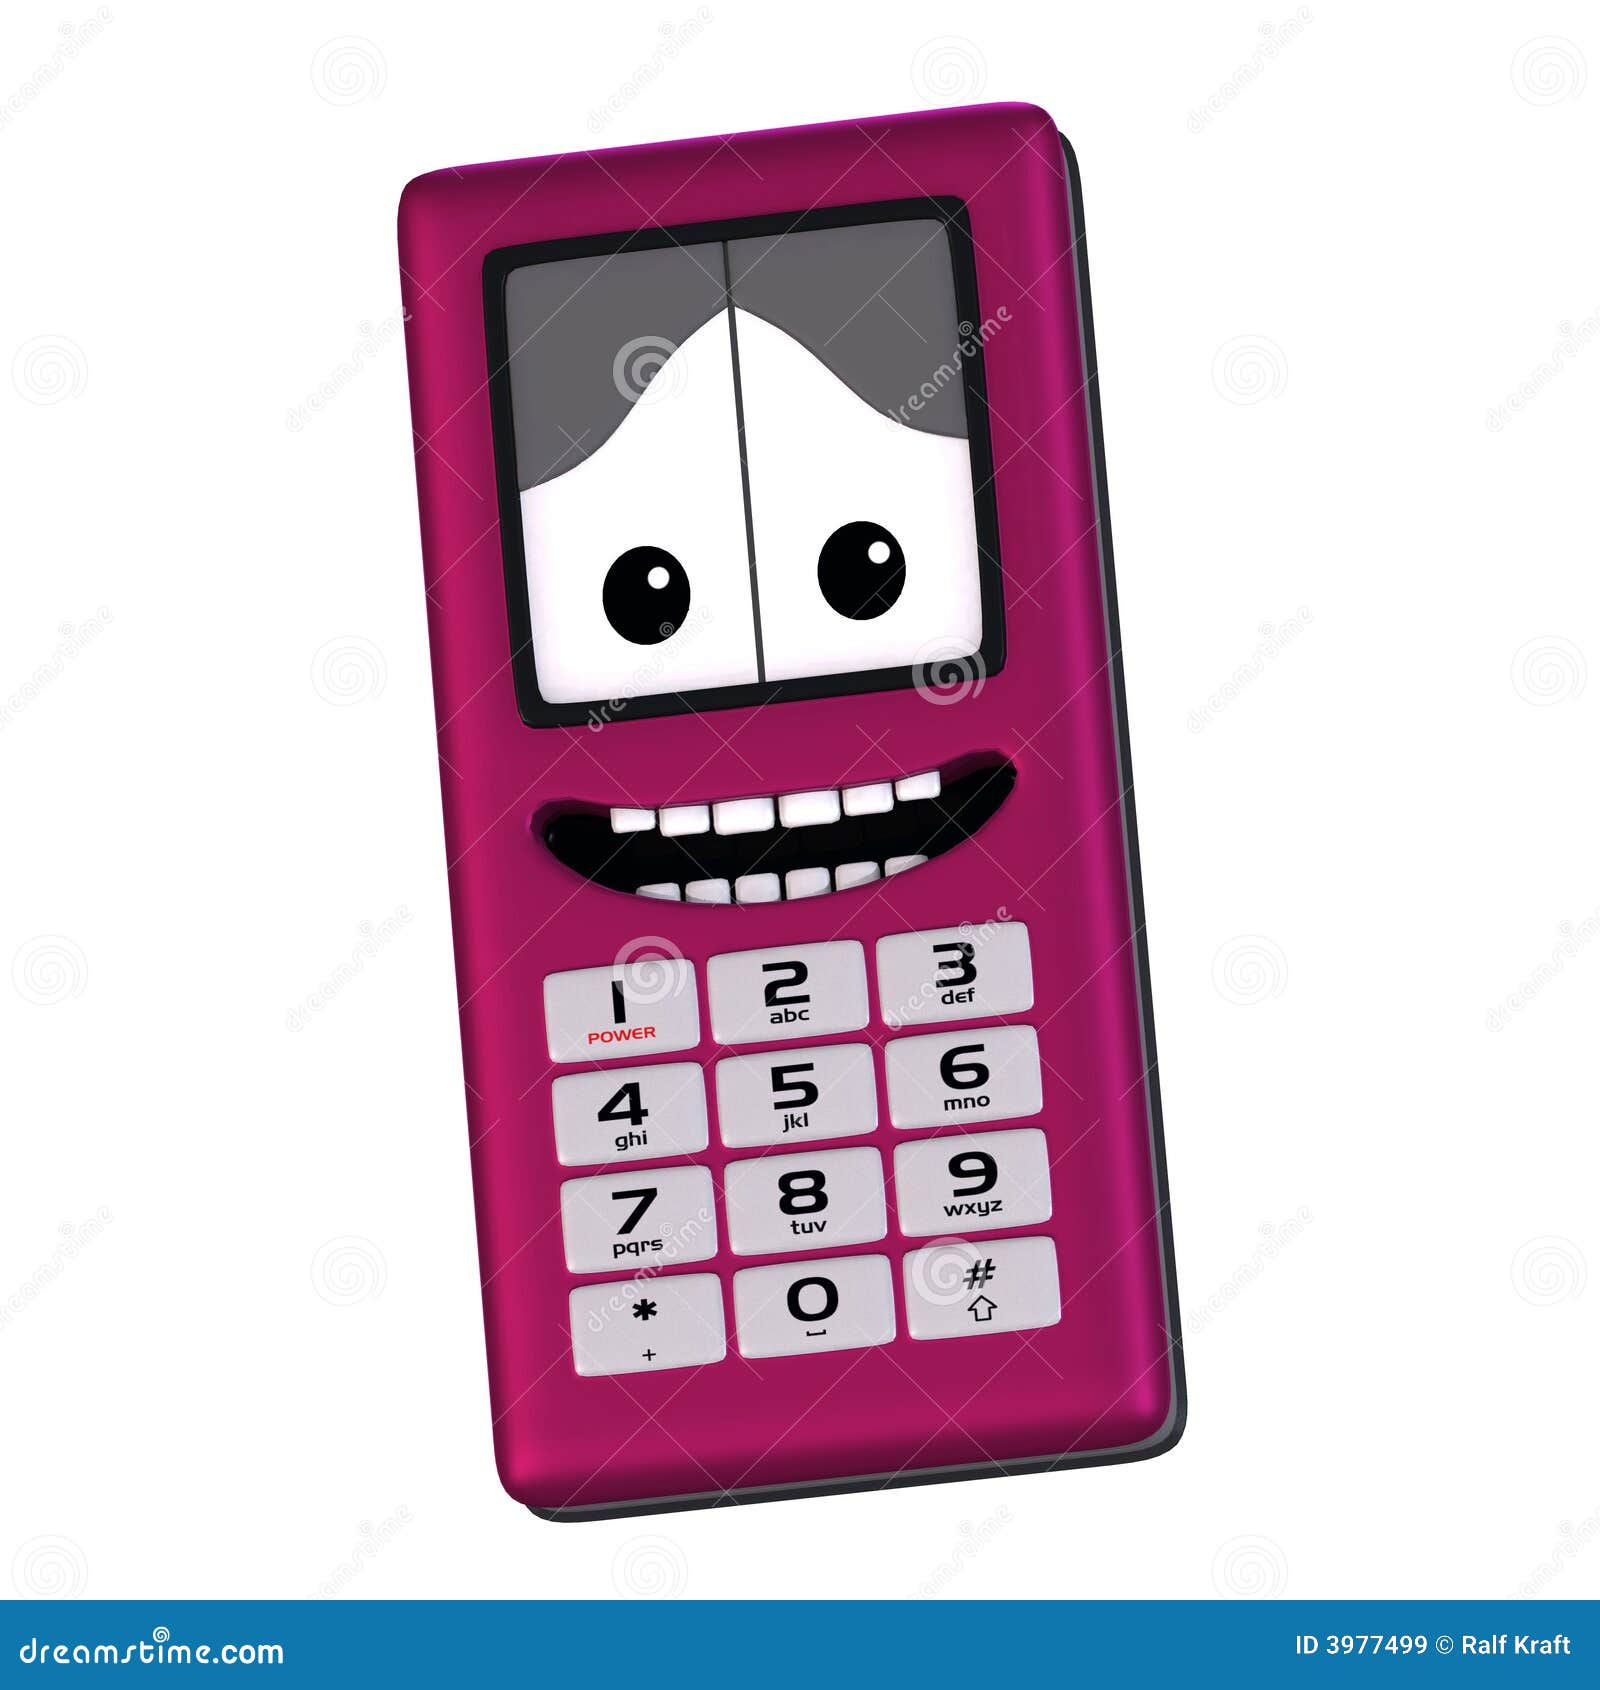 Cartoon Cell Phone Royalty Free Stock Images - Image: 3977499